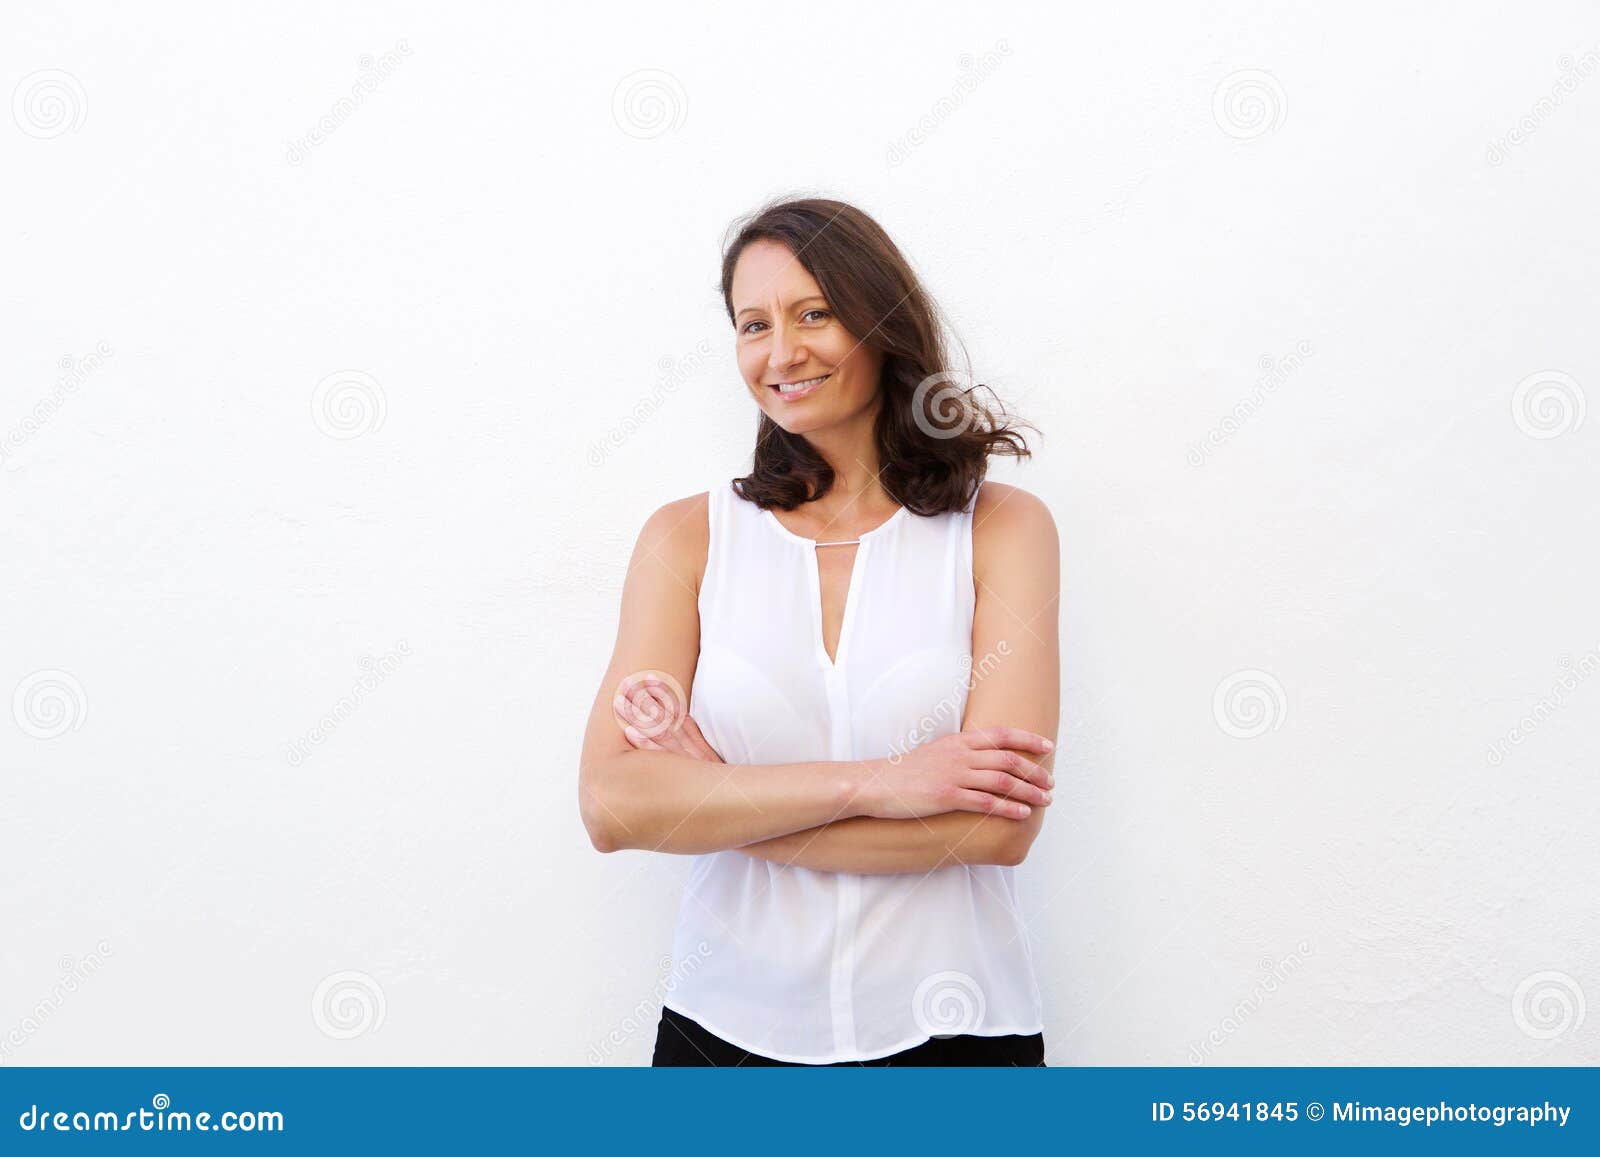 smiling woman in her 30s